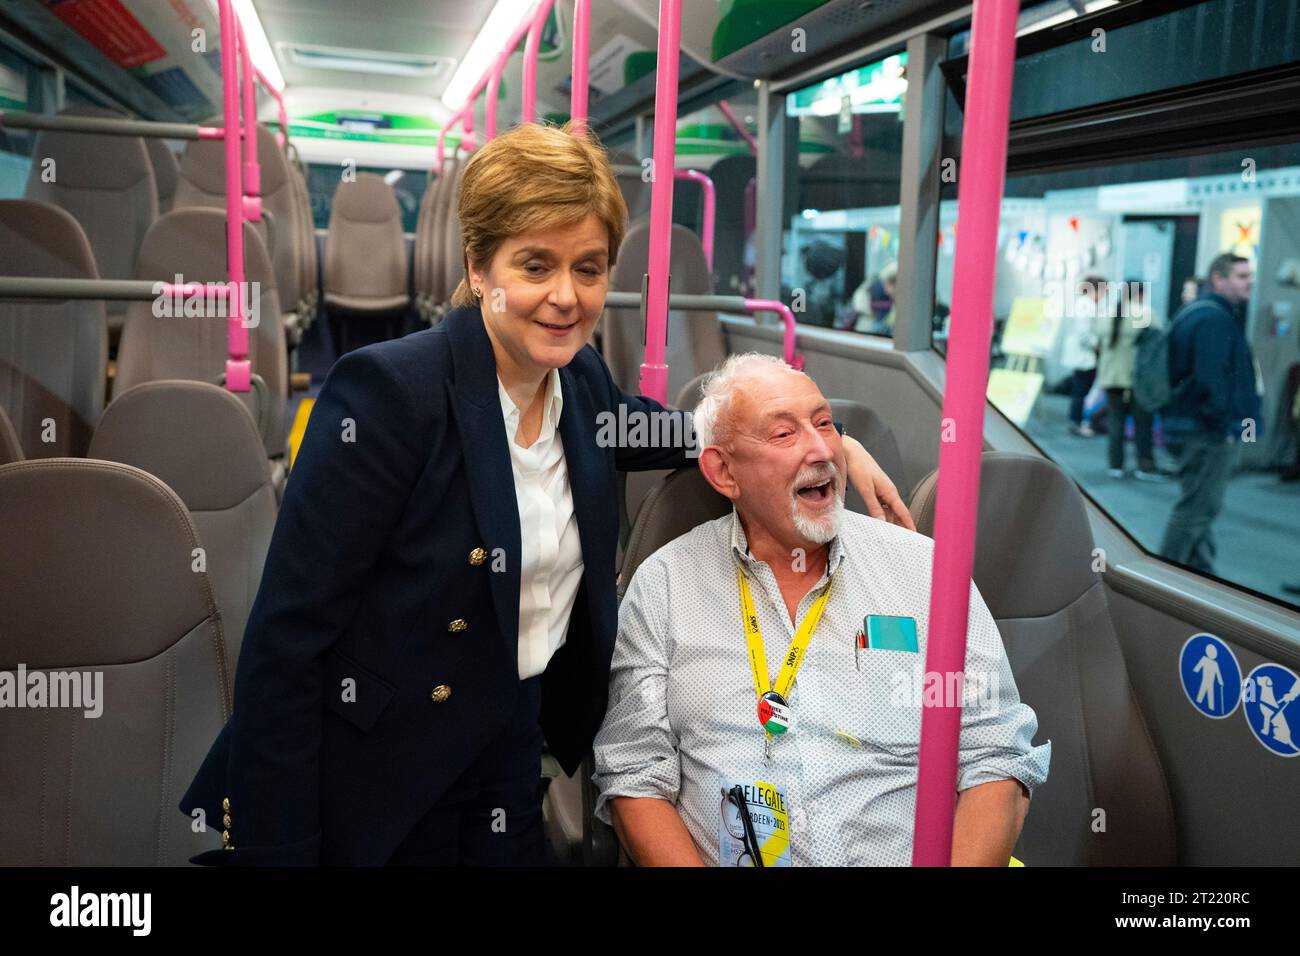 Aberdeen, Scotland, UK. 16th October 2023.  Day two of the SNP annual conference and former First Minister Nicola Sturgeon makes an appearance. A media frenzy followed before she made her way into the conference venue to listen to the afternoon’s proceedings. Nicola Sturgeon meets team members from First Bus on a new electric bus. Iain Masterton/Alamy Live News Stock Photo